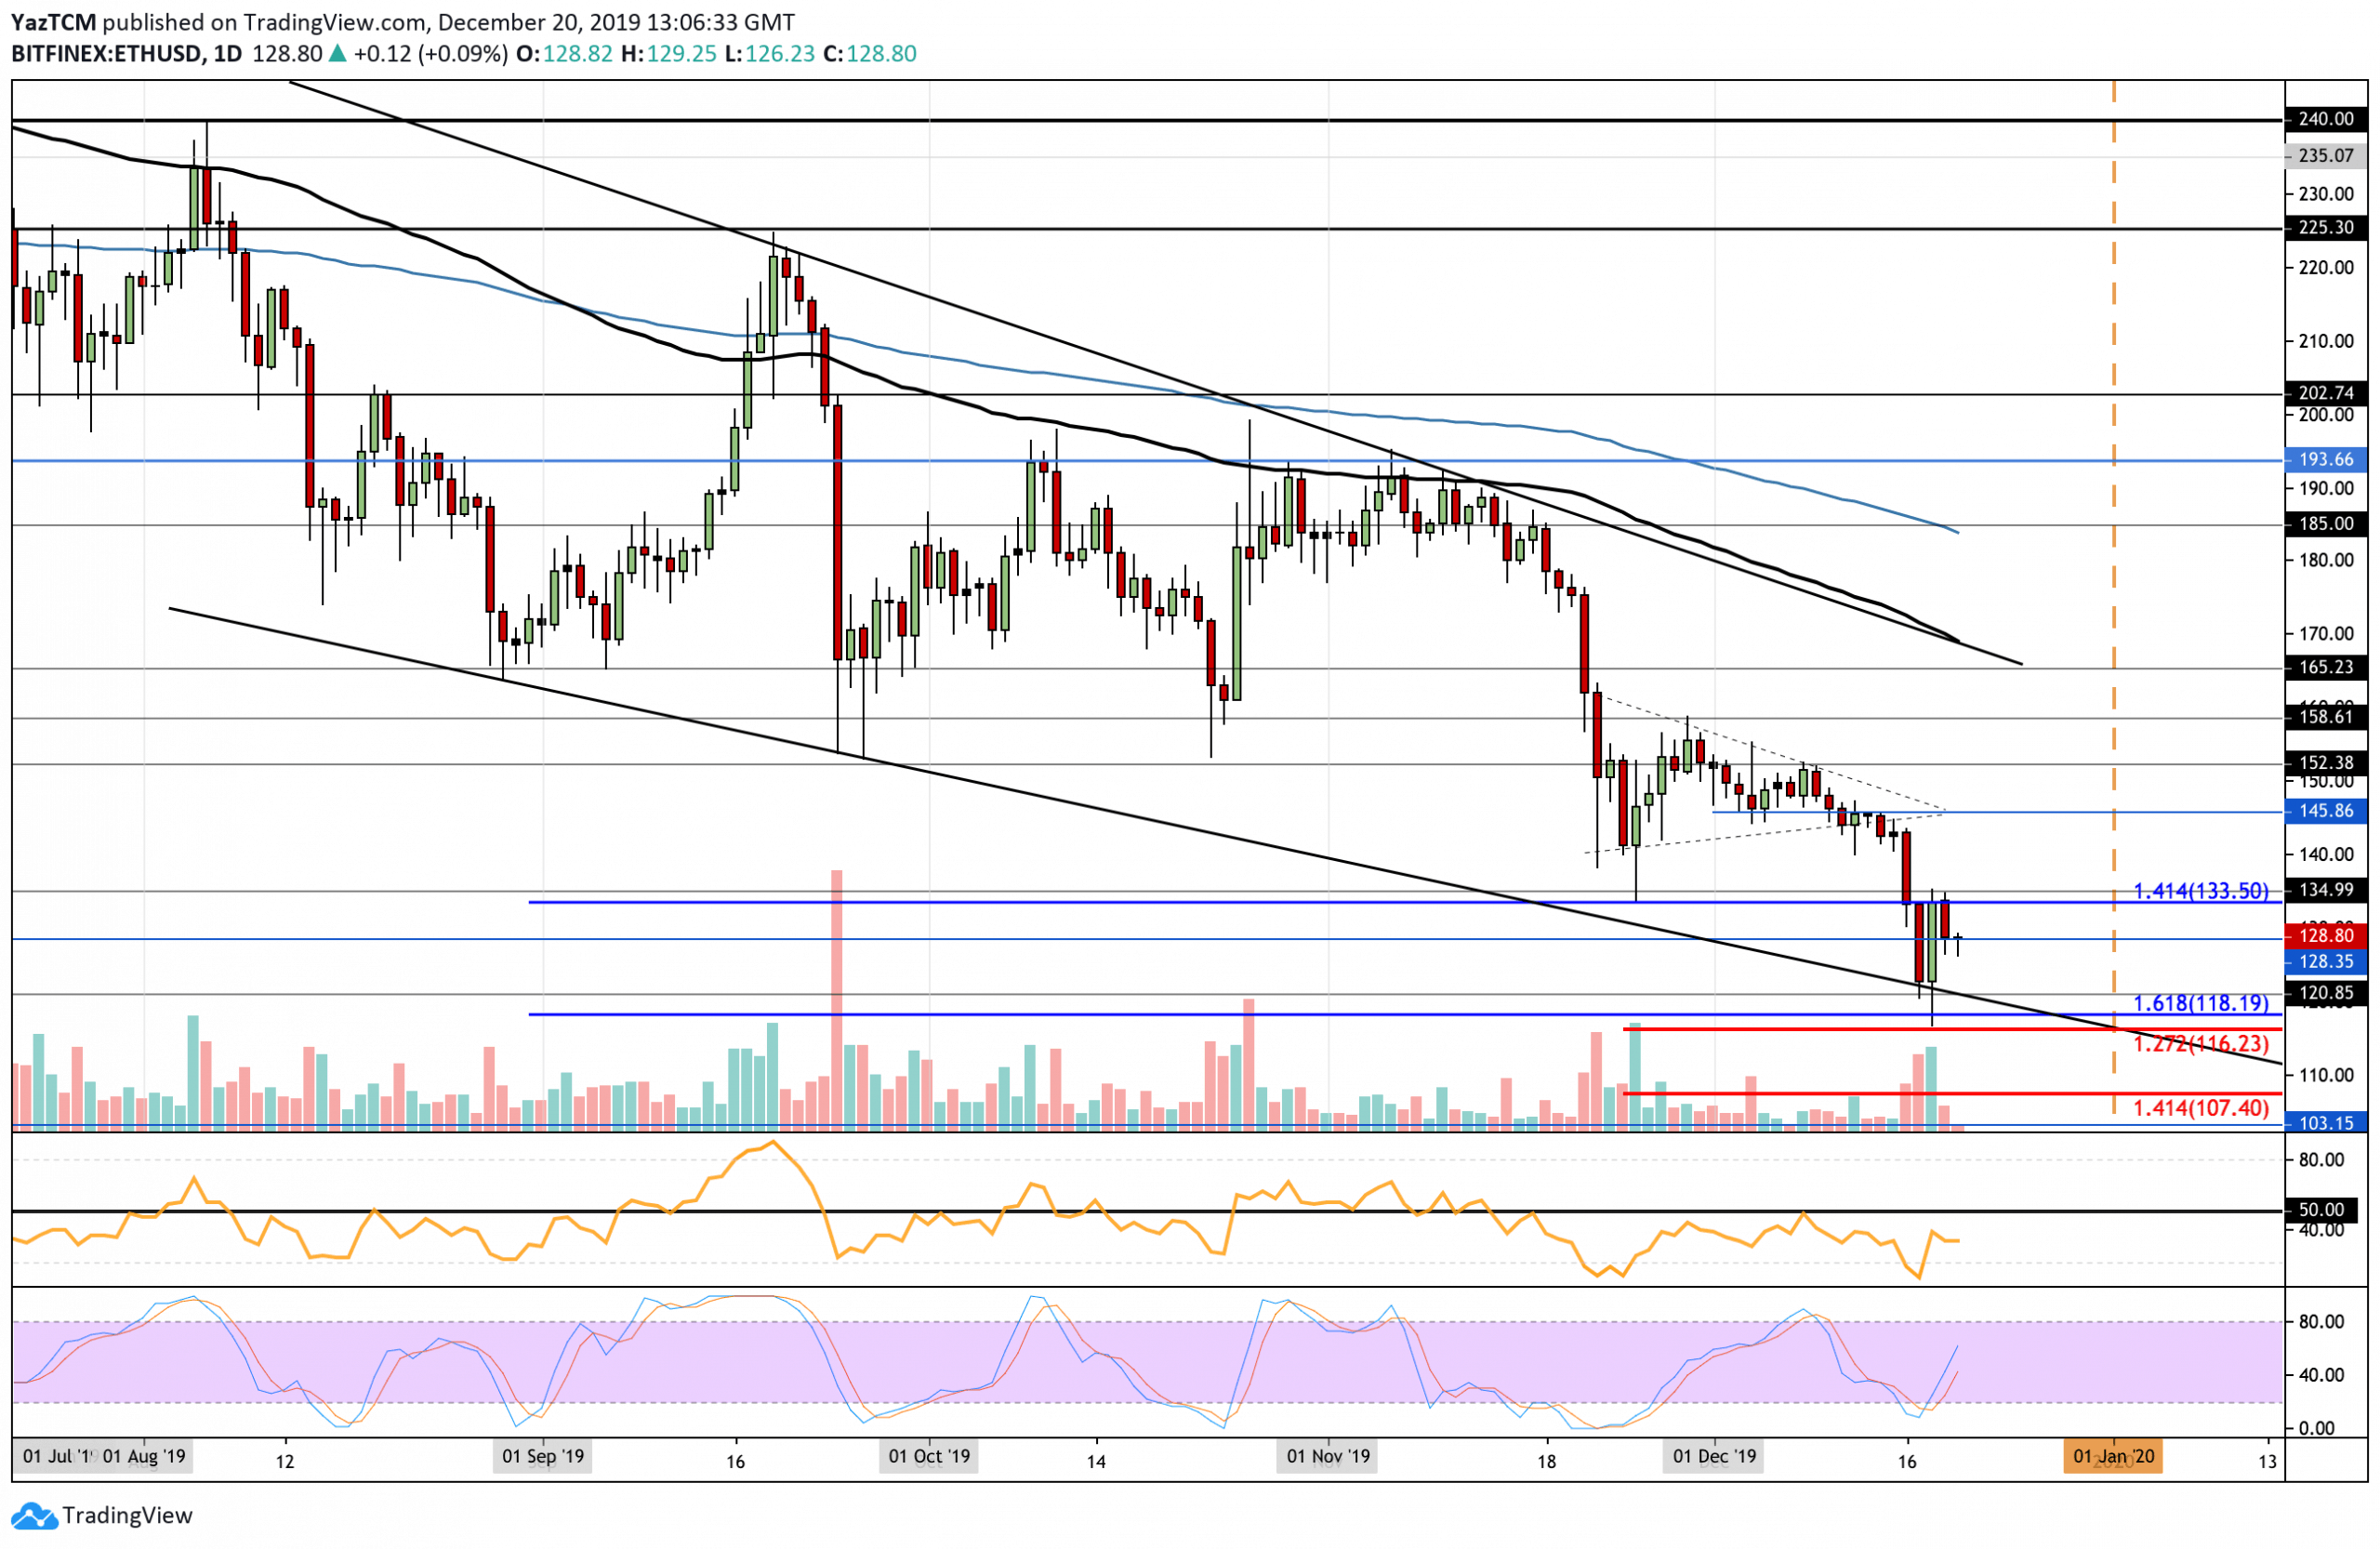 Crypto Price Analysis & Overview December 20th: Bitcoin, Ethereum, Ripple, Litecoin, and Binance Coin.